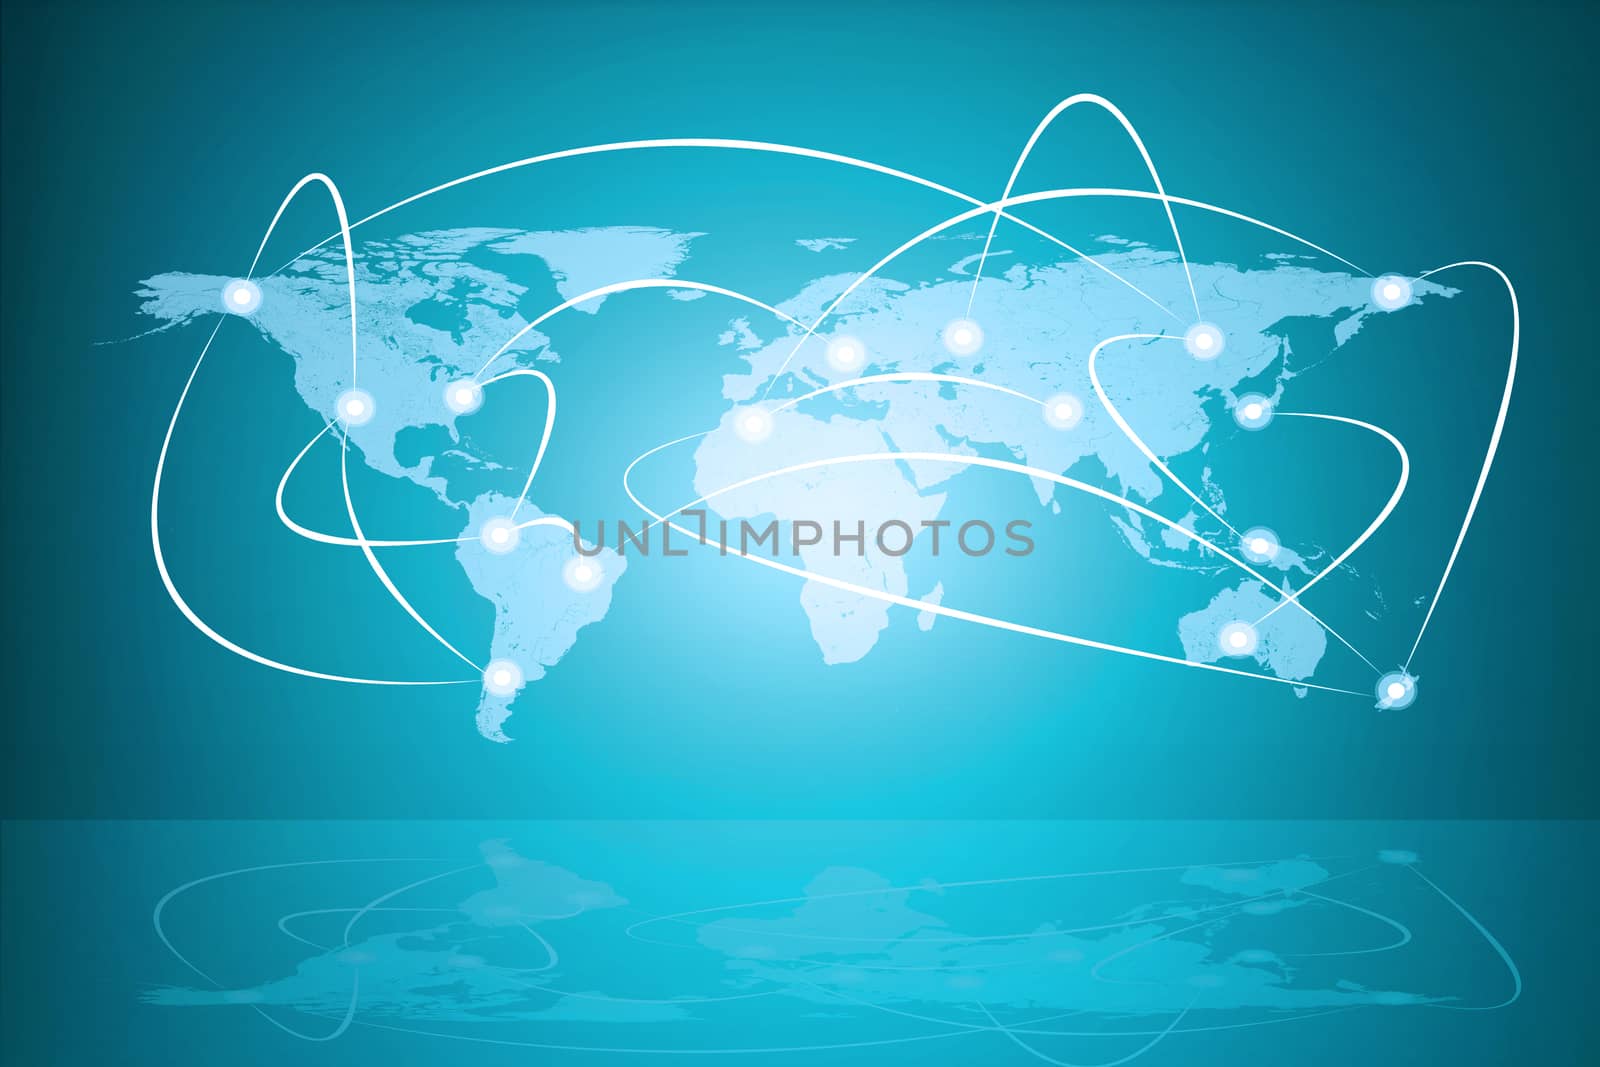 Abstract blue background with world map, connected points and reflection